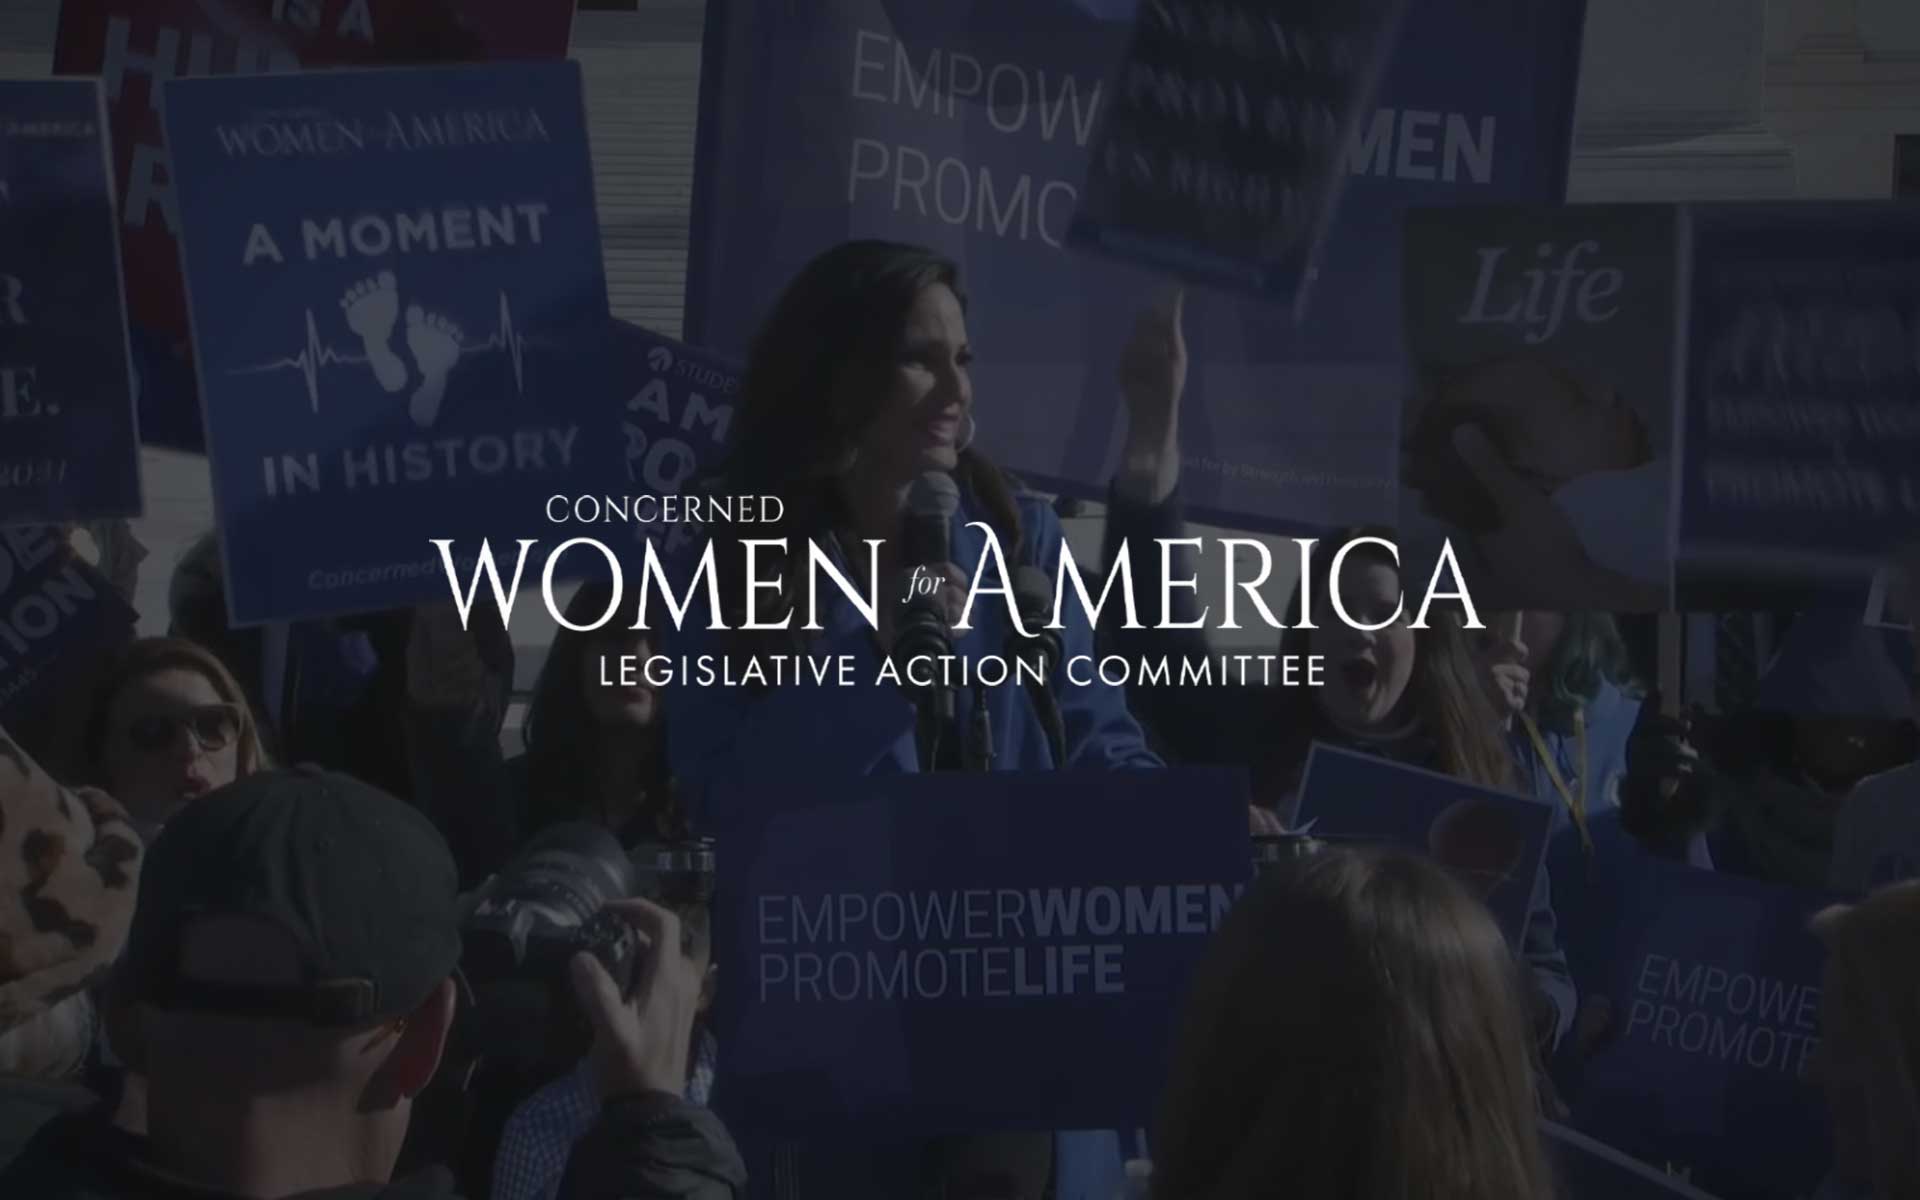 Concerned Women for America: Protecting Biblical Values - Part 1